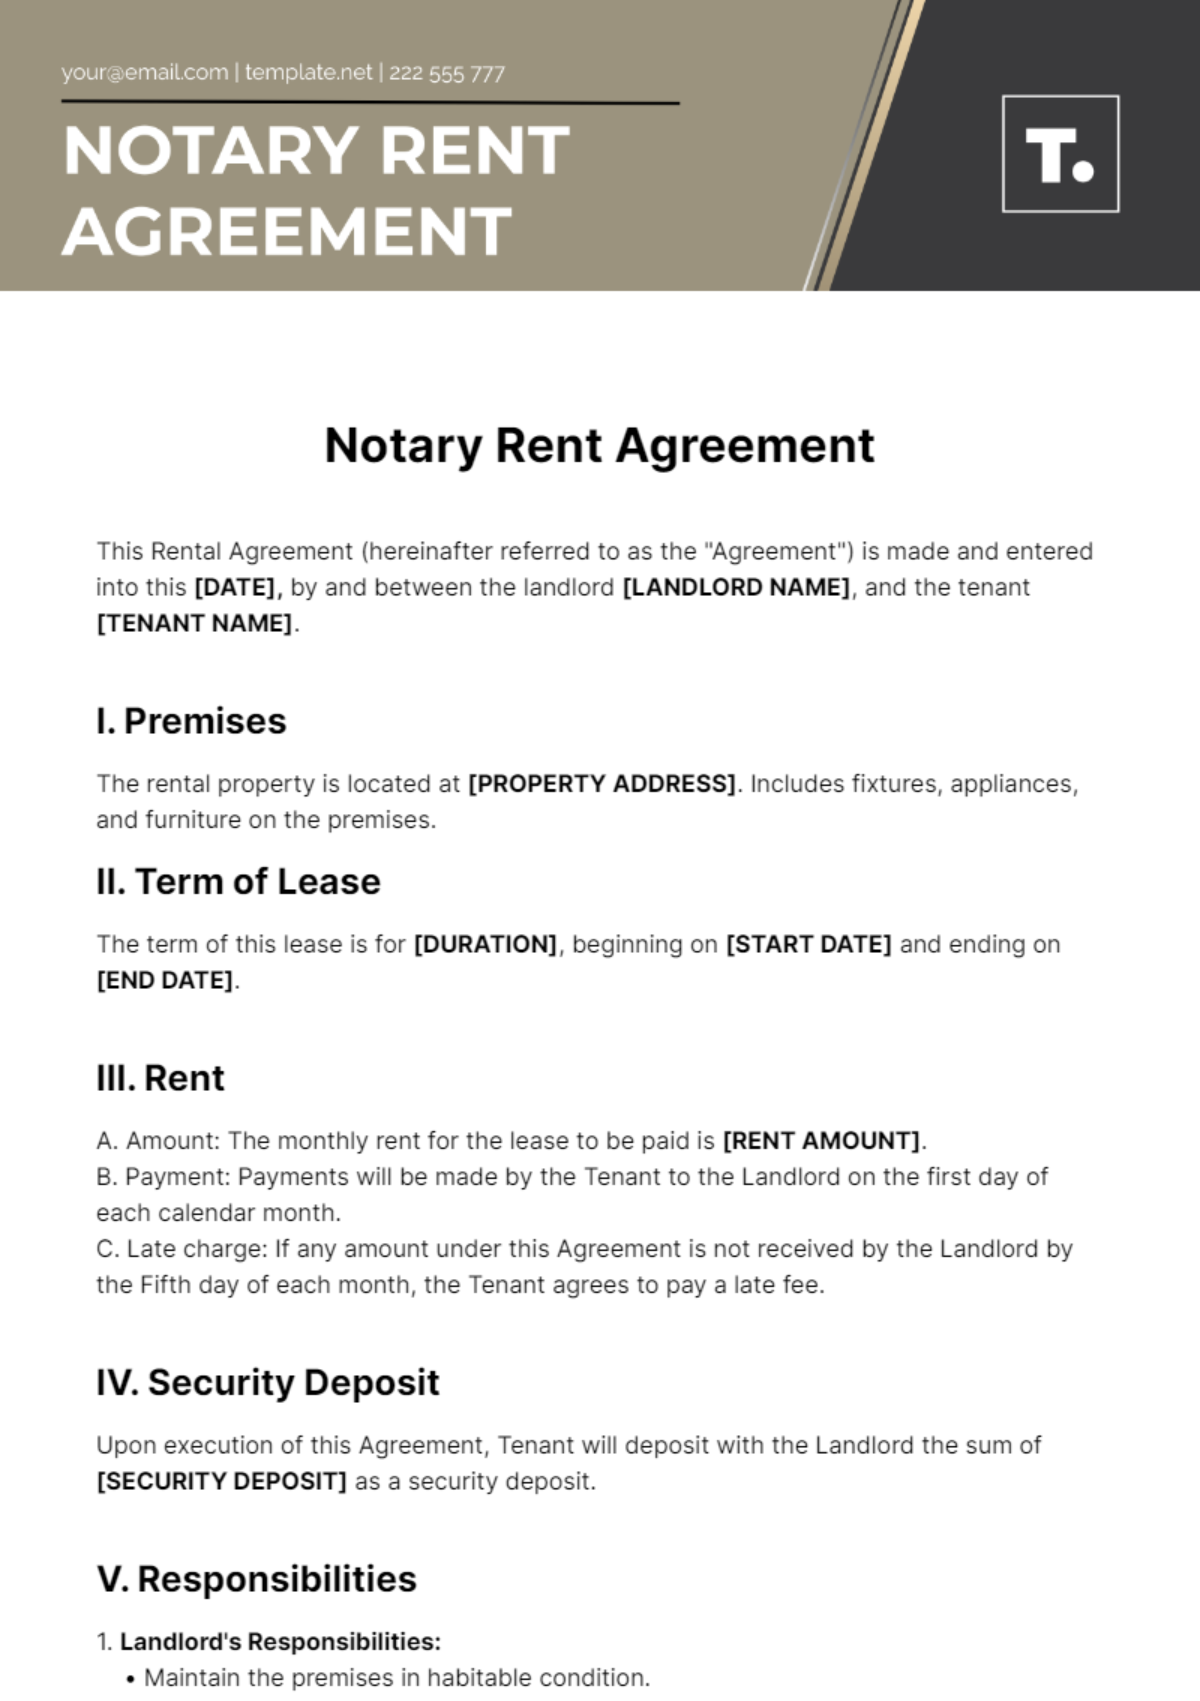 Free Notary Rent Agreement Template